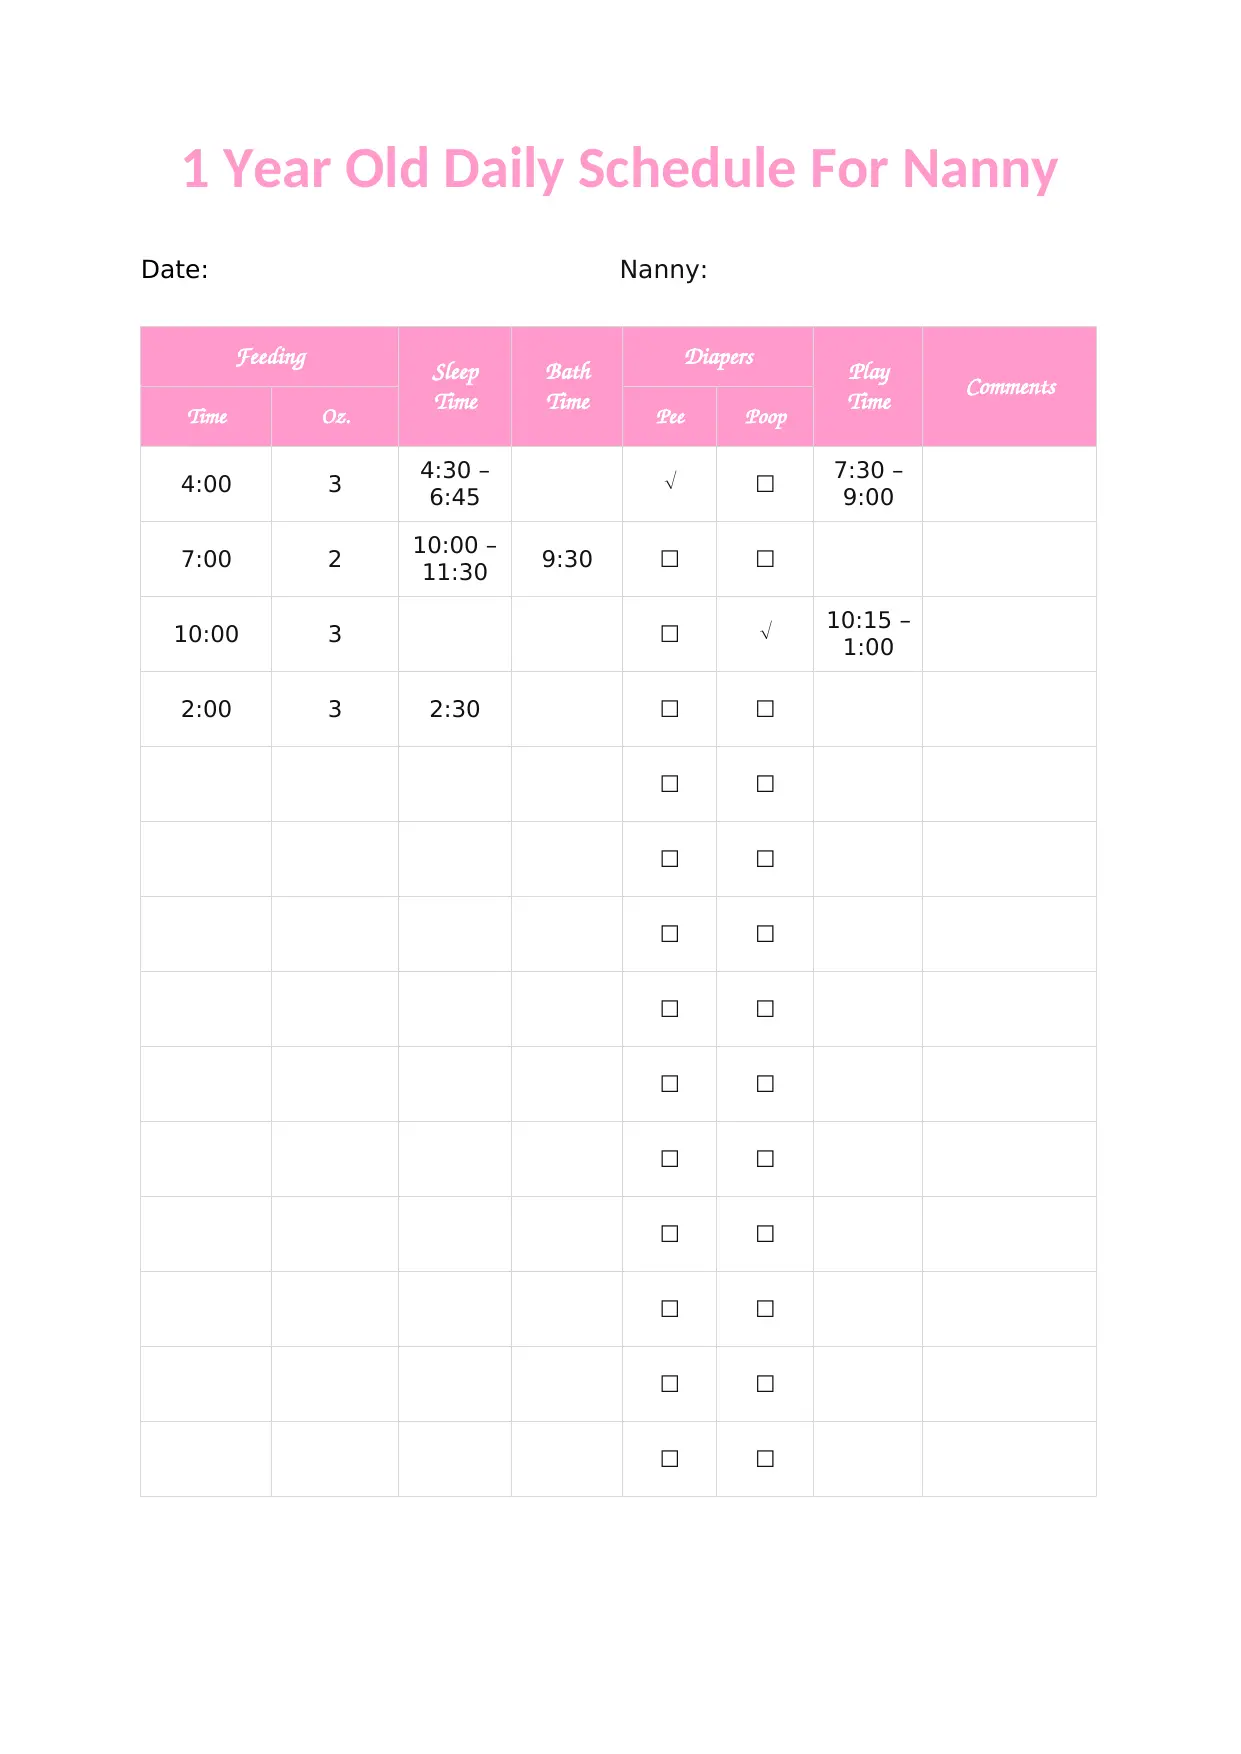 1 Year Old Daily Schedule Template For Nanny